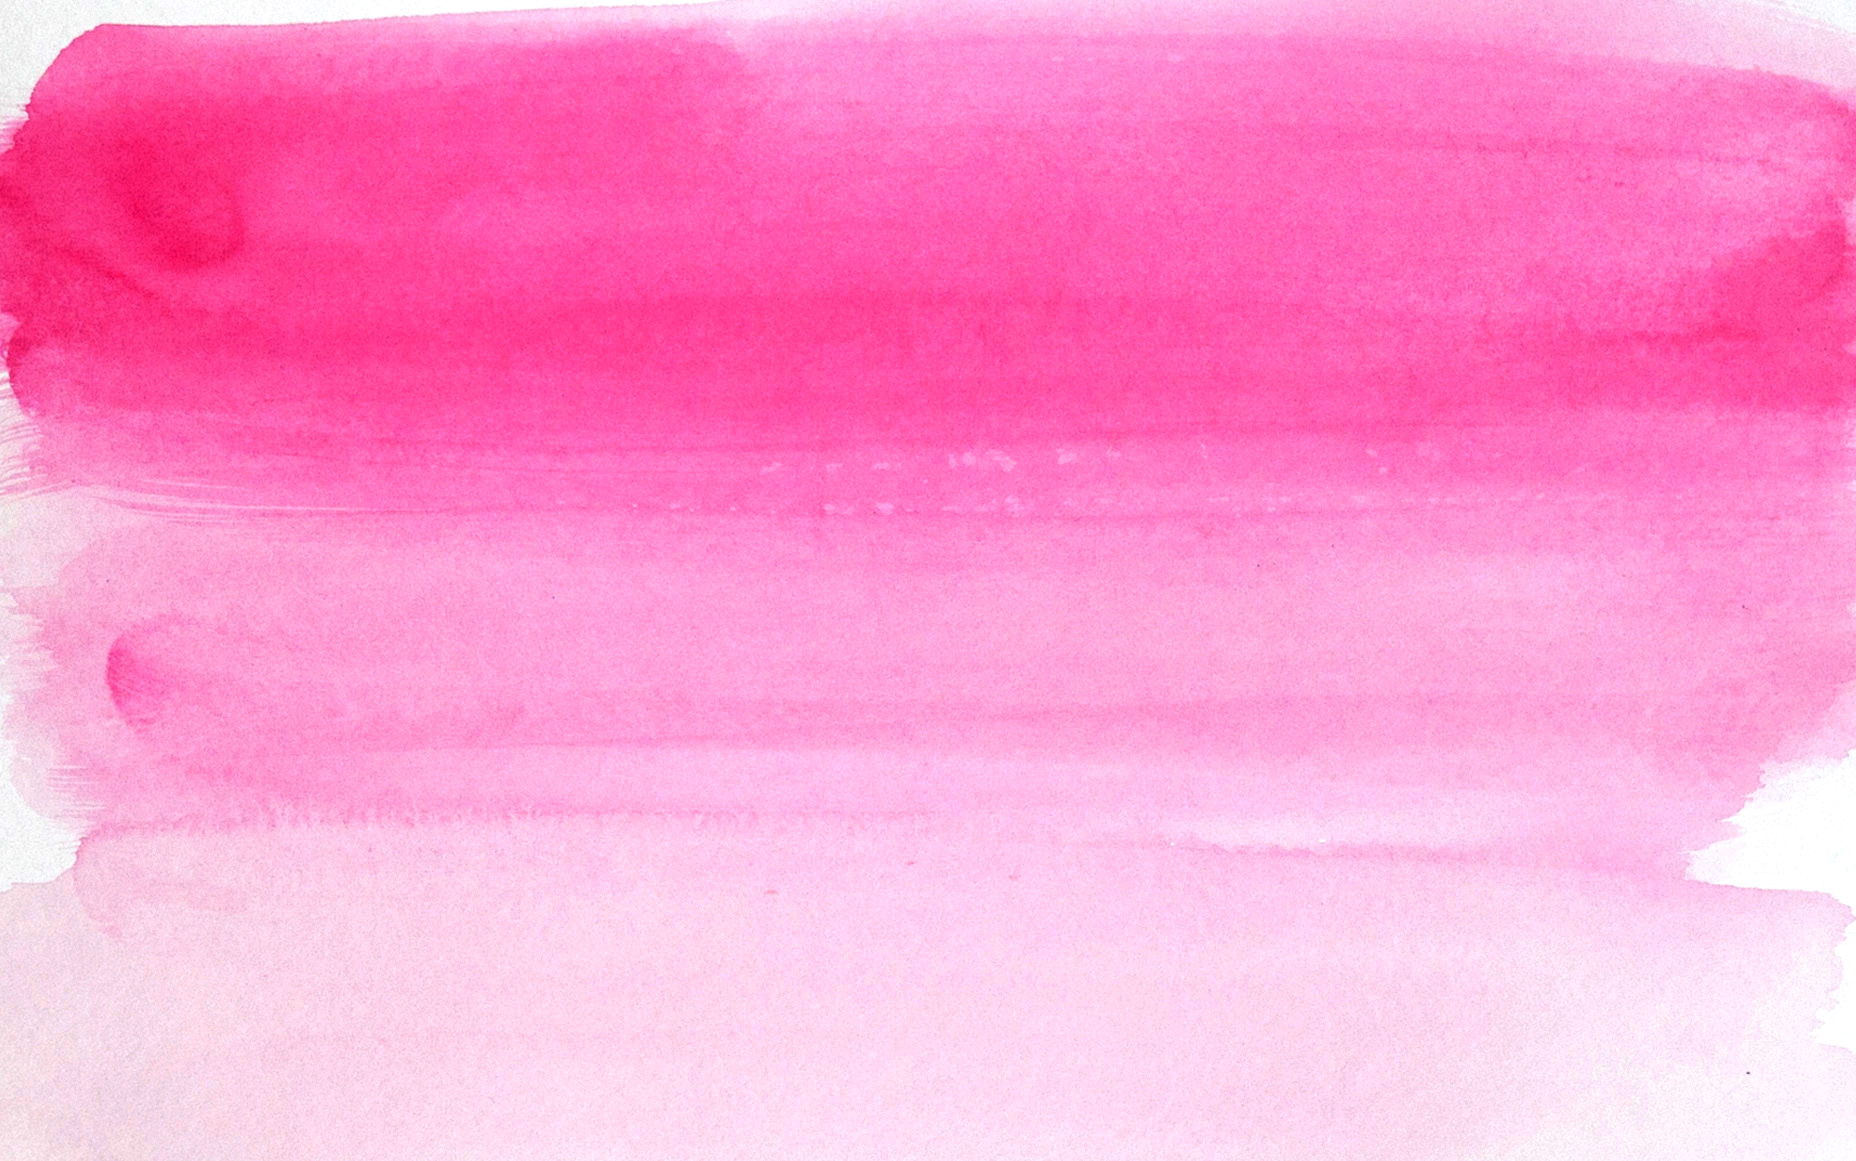 Pink Watercolor I Used To Make The Design Is From